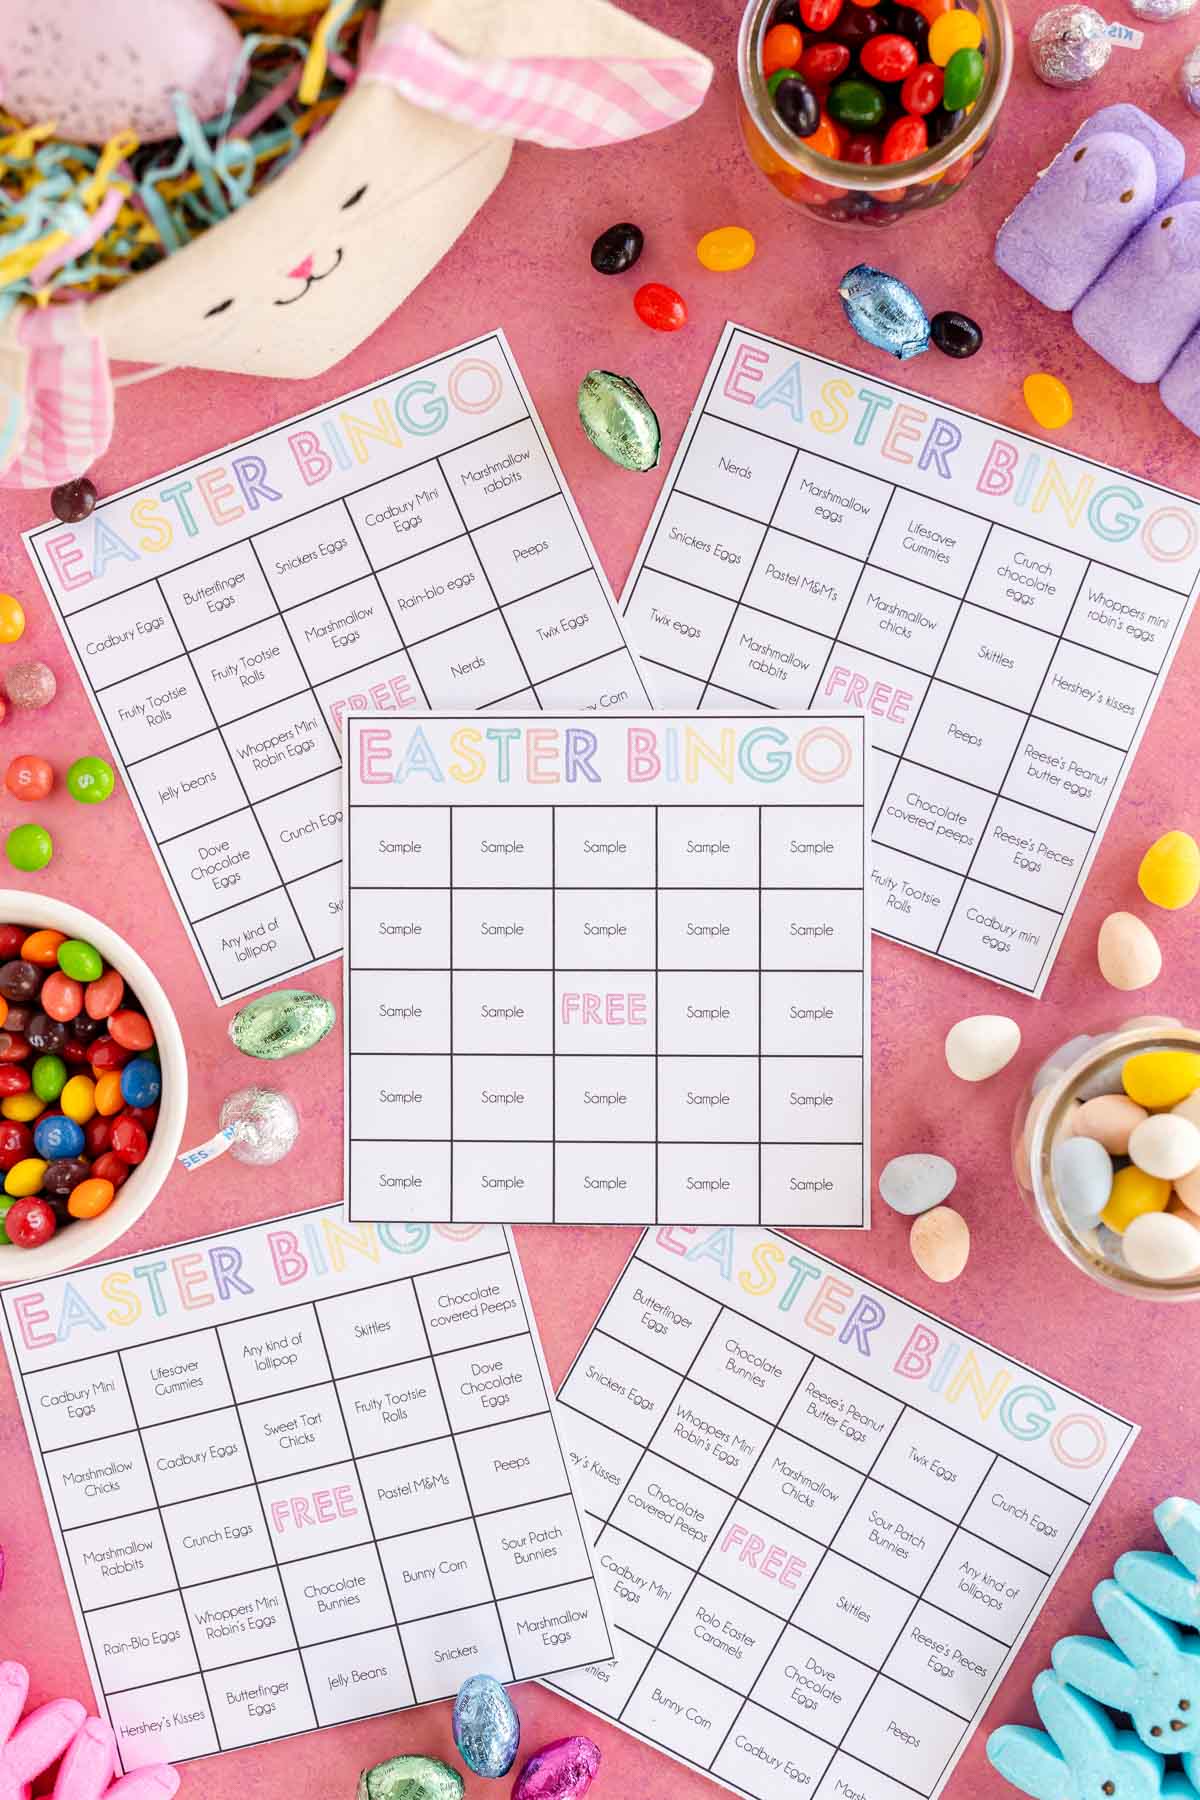 Easter candy bingo cards laid on out on a table